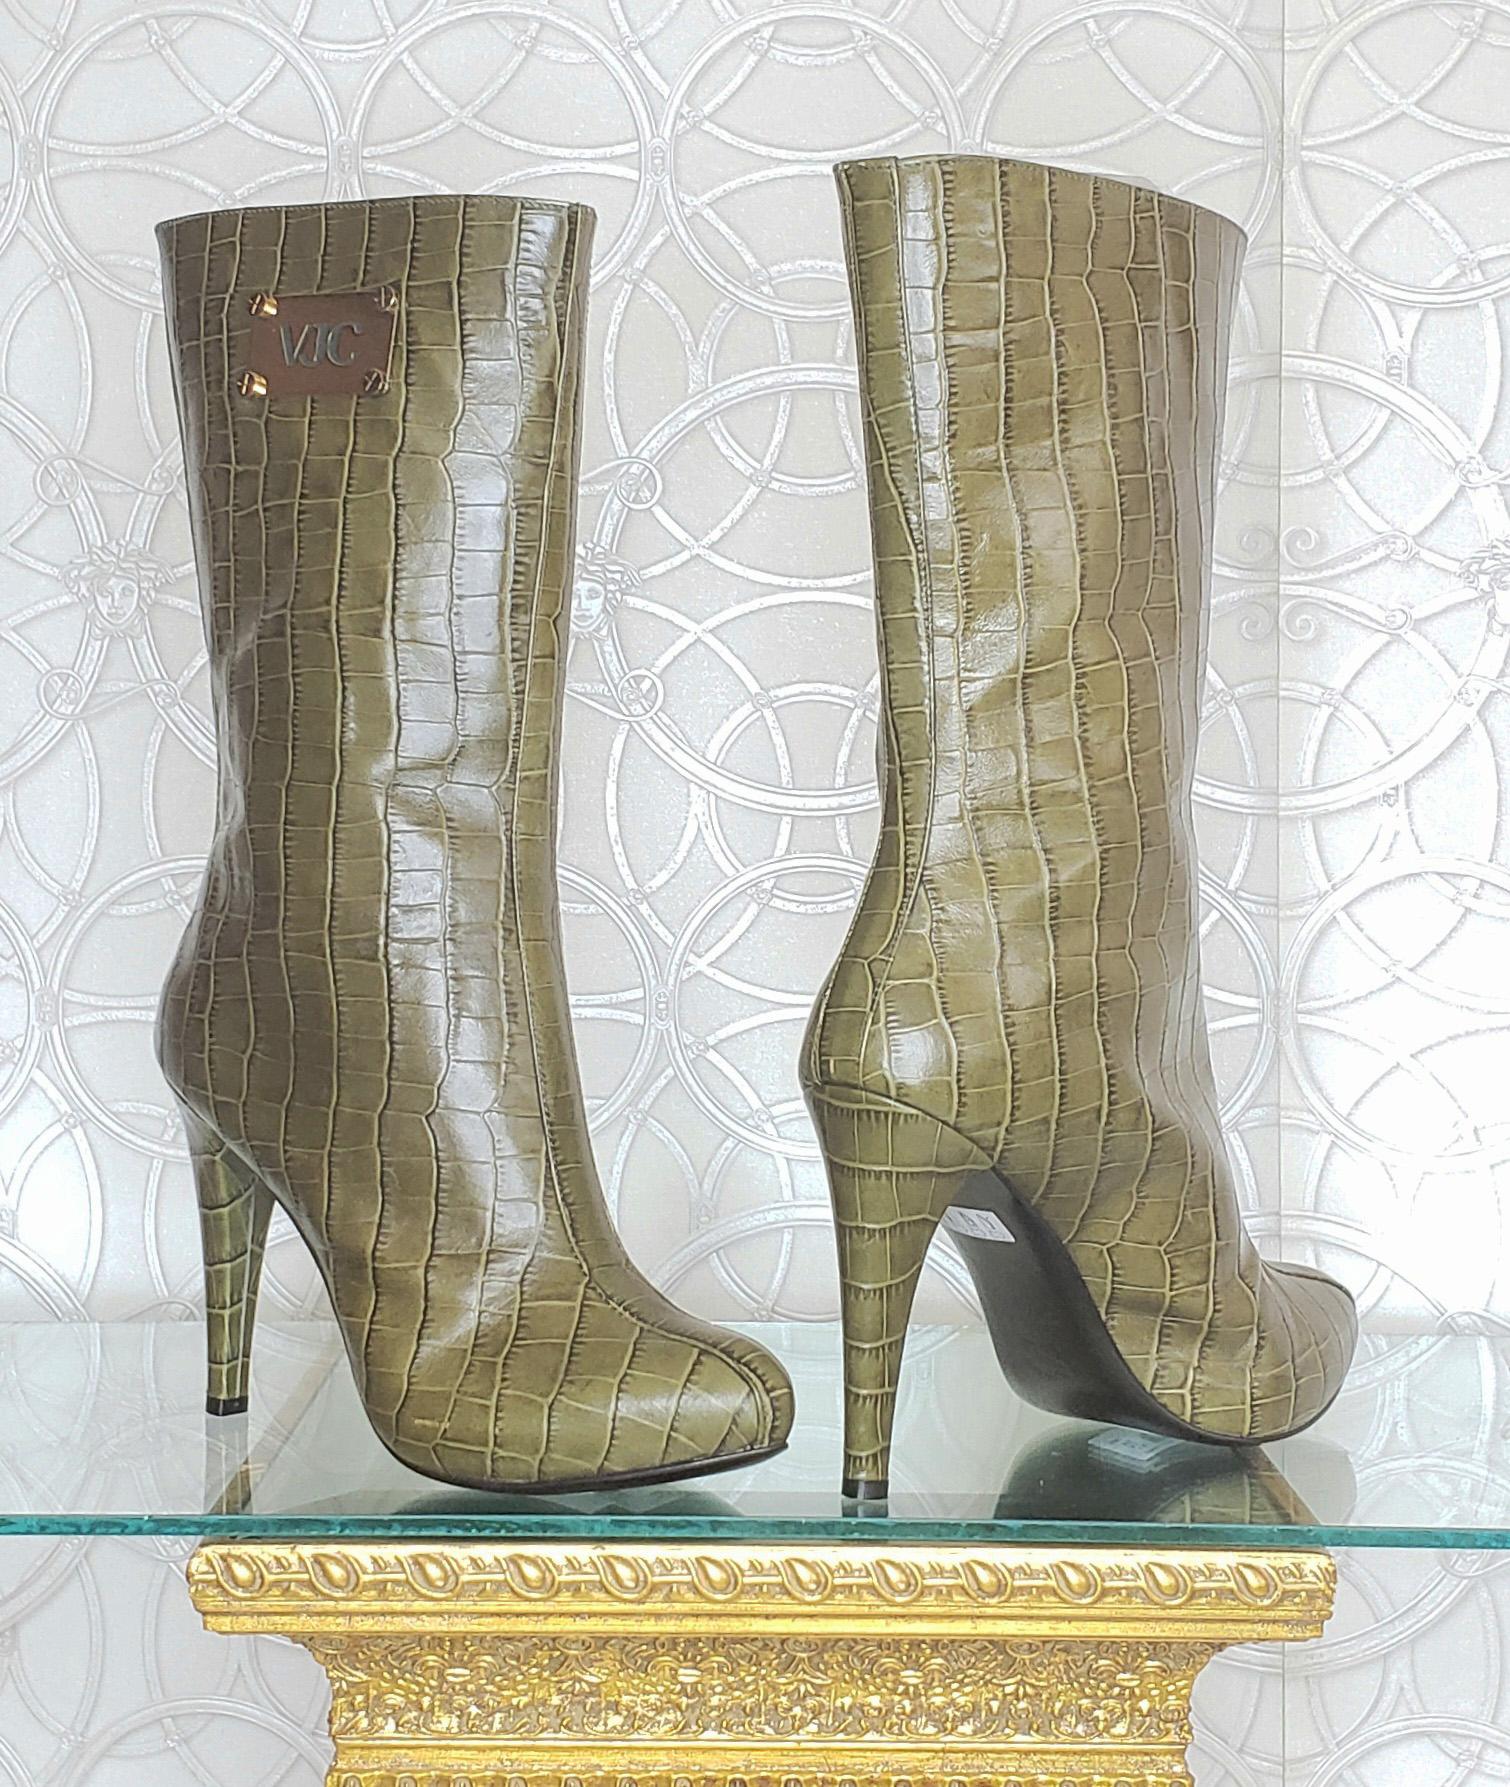 VERSACE VJC BOOTS

Green Crocodile  Print leather boots with gold hardware


Content: 
100% Leather upper

lining: Smooth 100% gold leather 

Heel height: 4 1/2